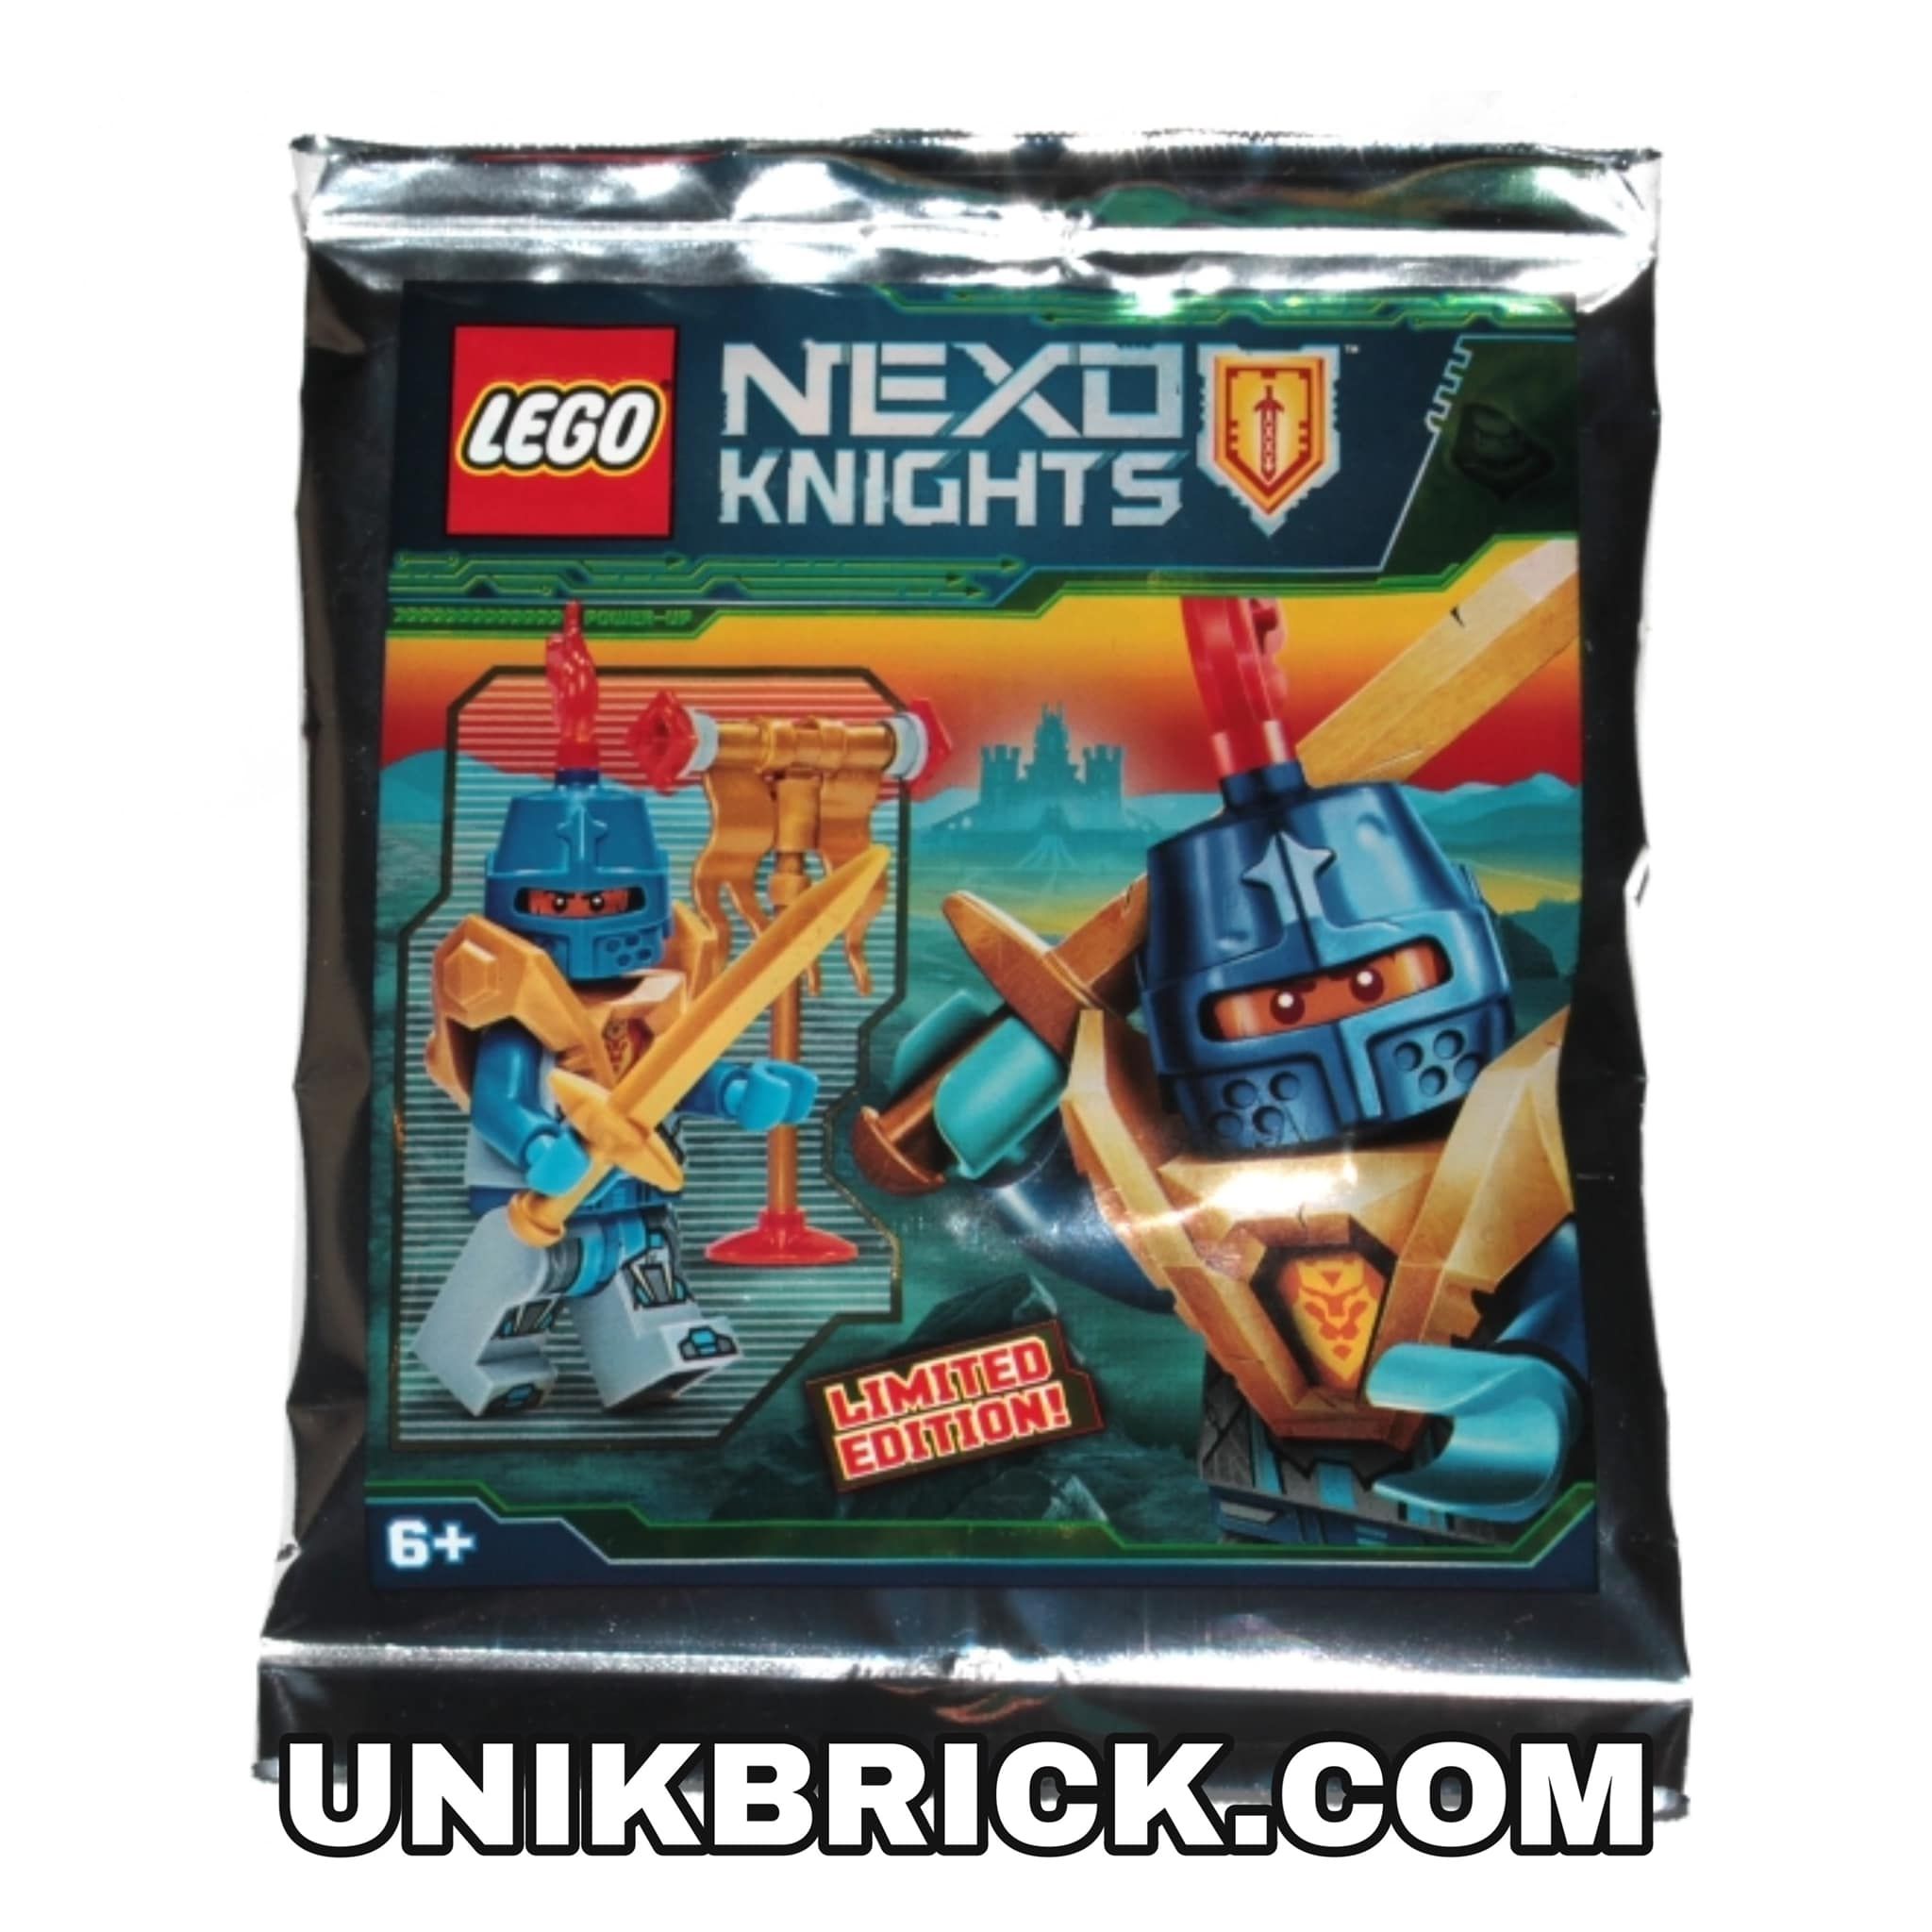 [ORDER ITEMS] LEGO Nexo Knights 271830 Knight Soldier Foil Pack Polybag